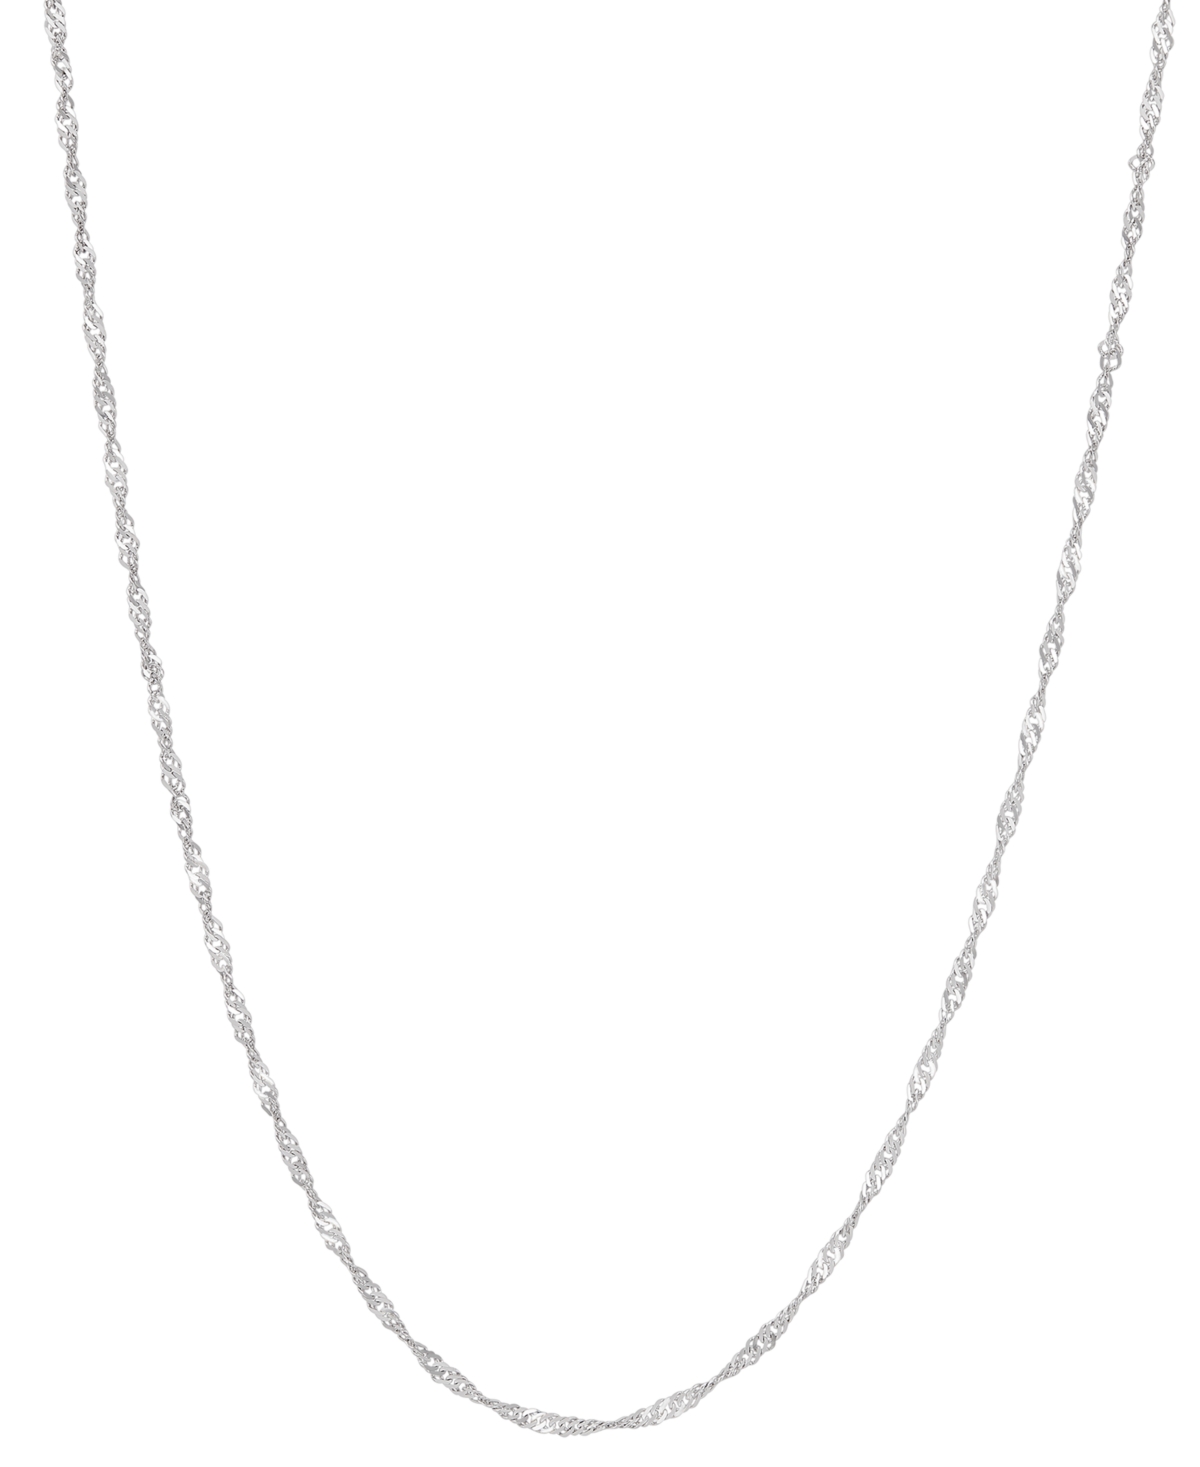 Singapore Chain 24" Strand Necklace (1-1/3mm) in 14k White Gold - White Gold